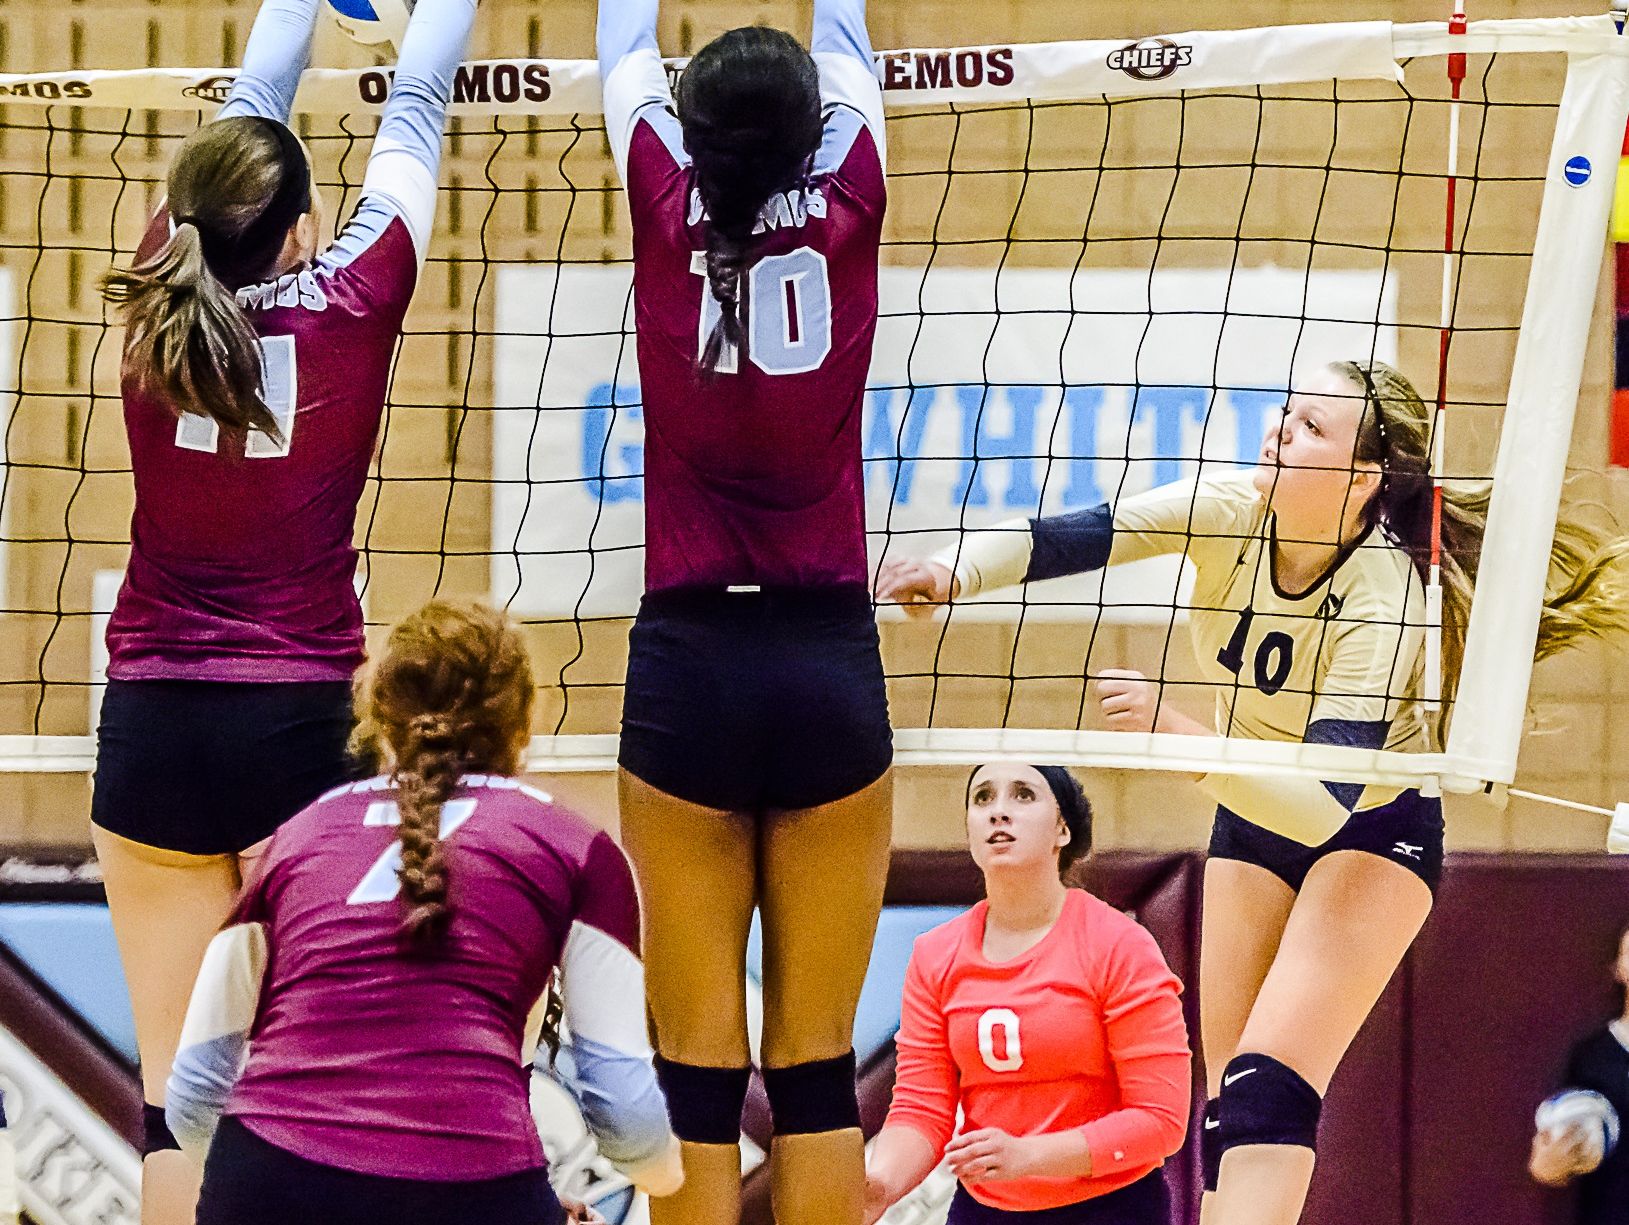 Breann DeLoye, left, of Okemos blocks a hit by Allie Peterson, right, of Holt early in the third game of their match in 2015.